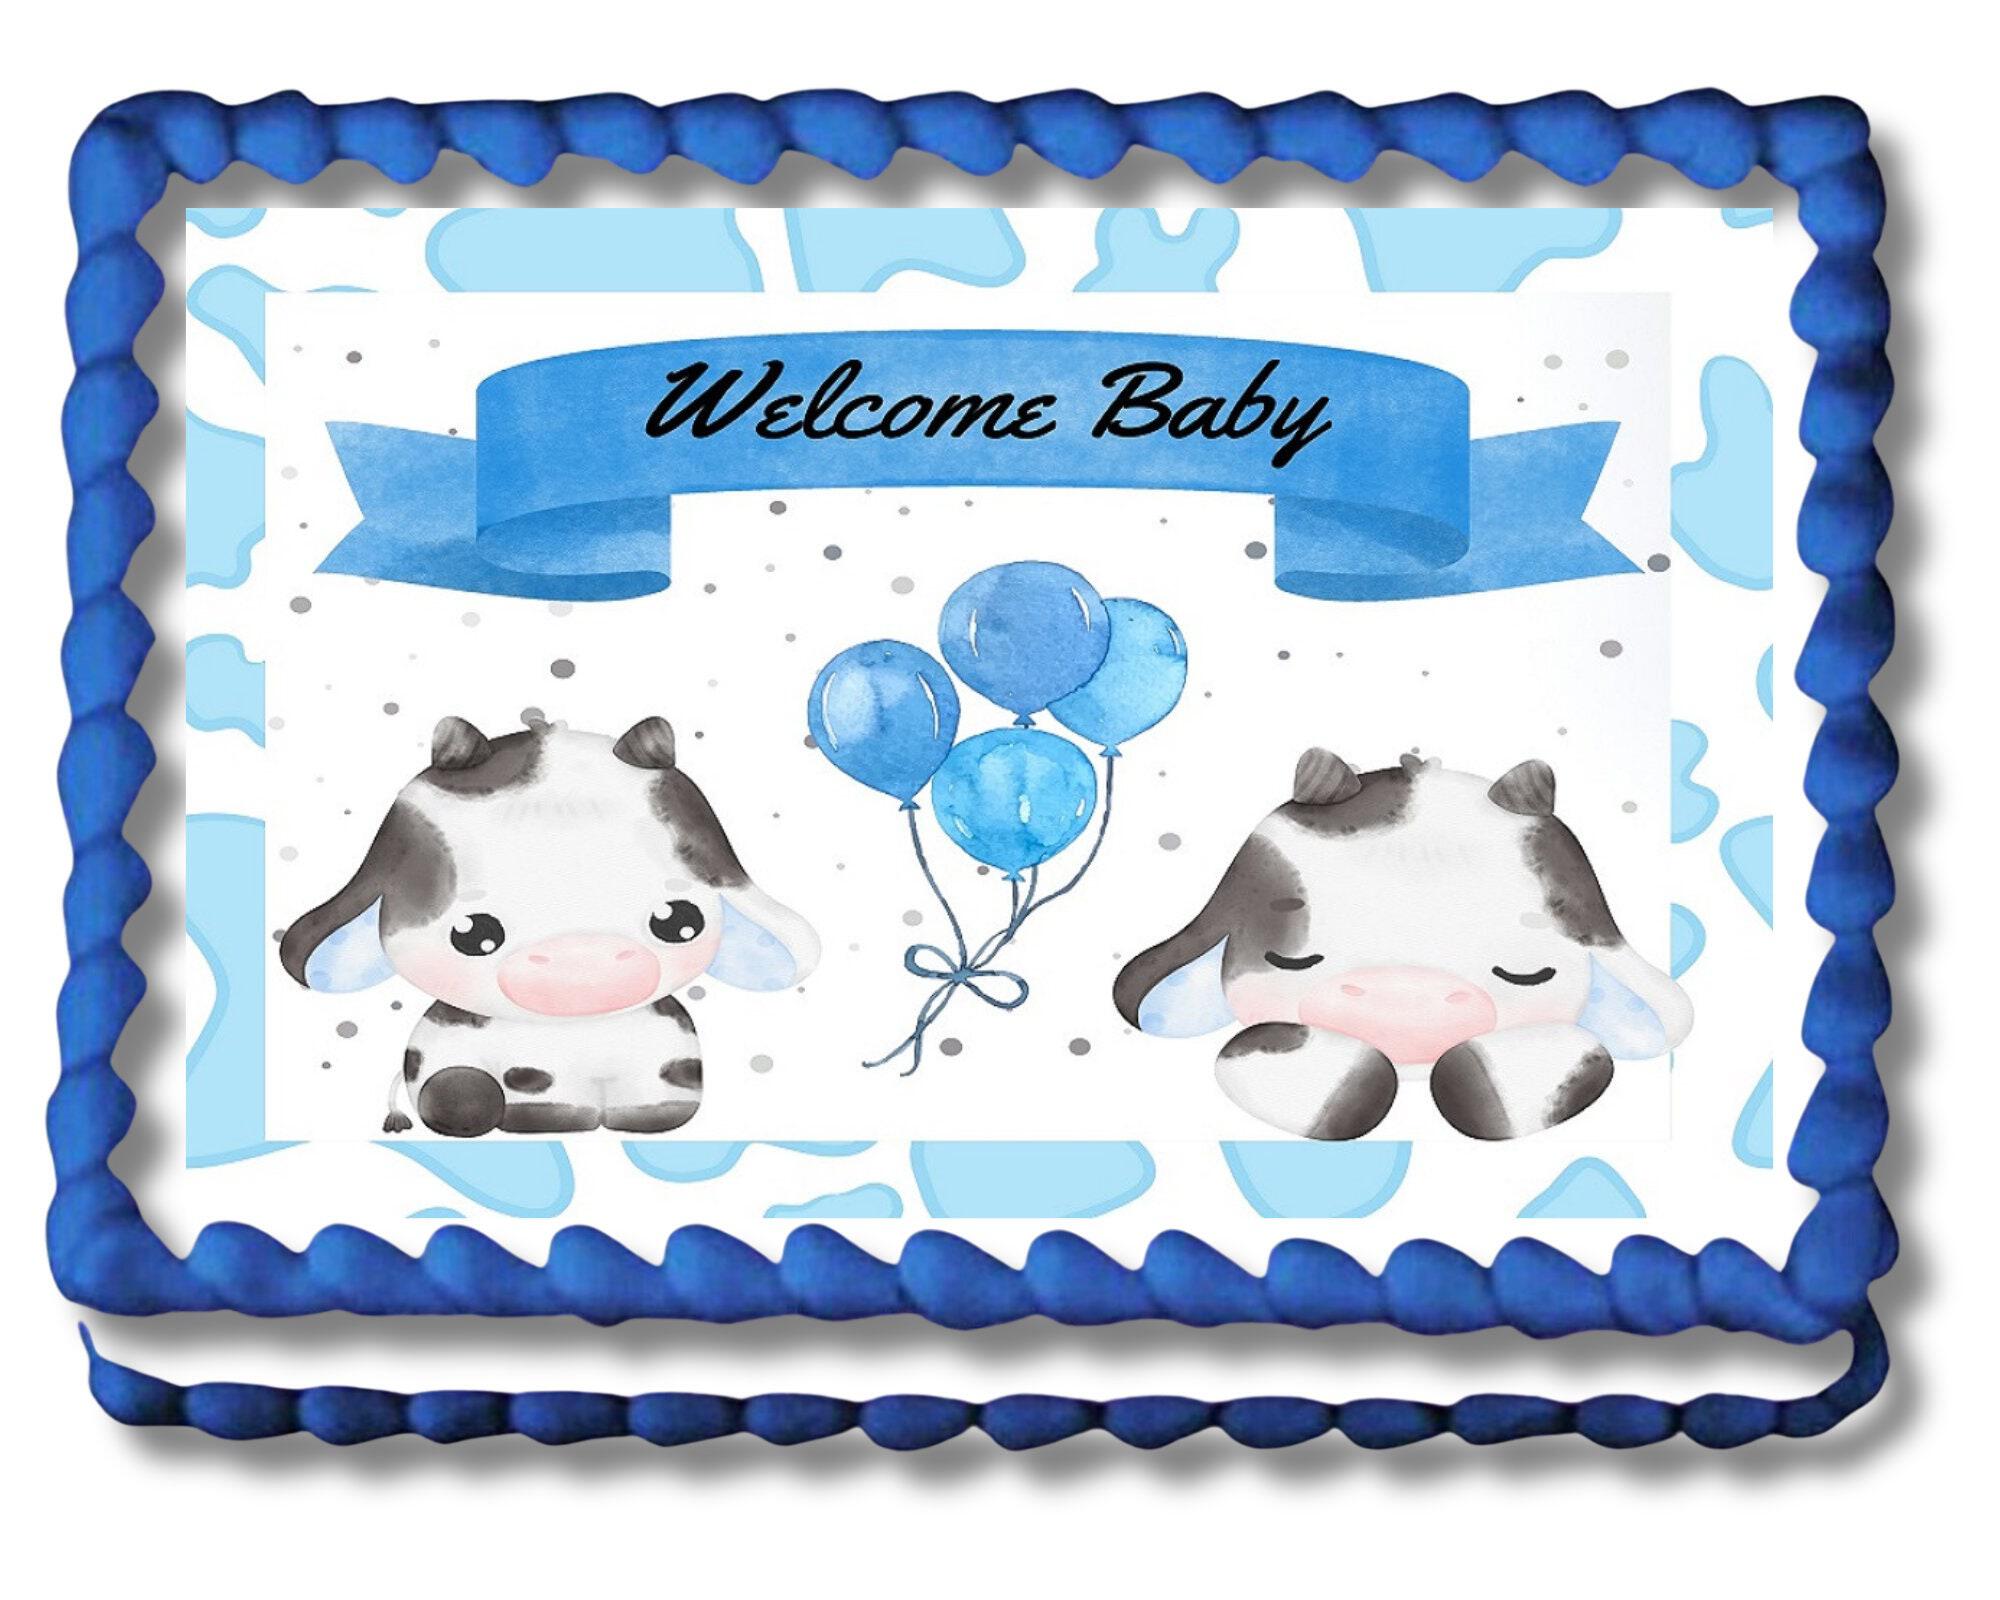 Baby Cow Blue Cow Print Edible Image 1st Birthday Themed Baby Shower Party  Cake Topper Frosting Sheet Icing Frosting Edible Sticker Decal